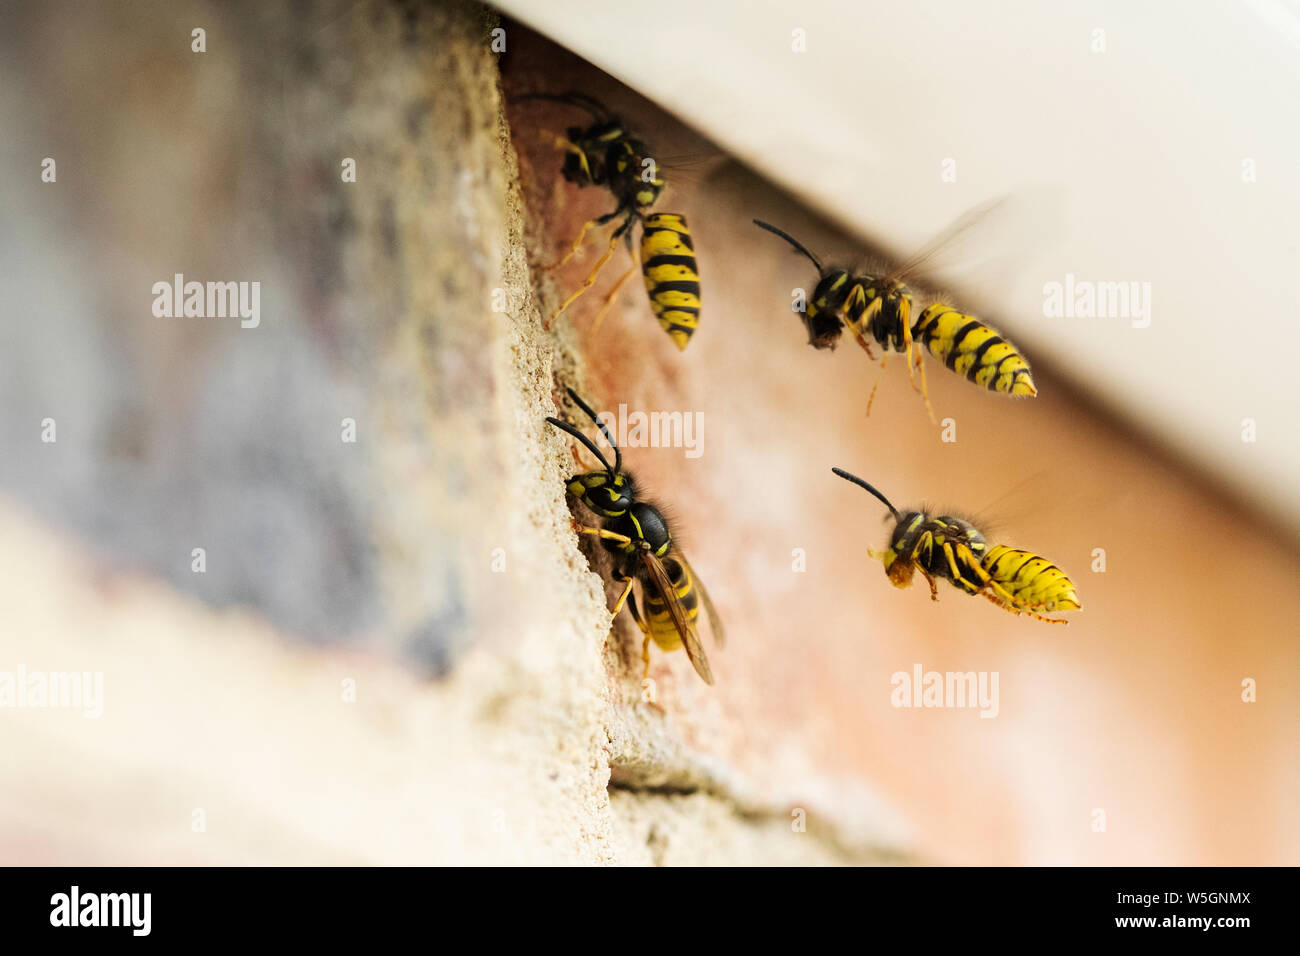 Wasps Causing Problem By Building Nest Under Roof Of House Stock Photo